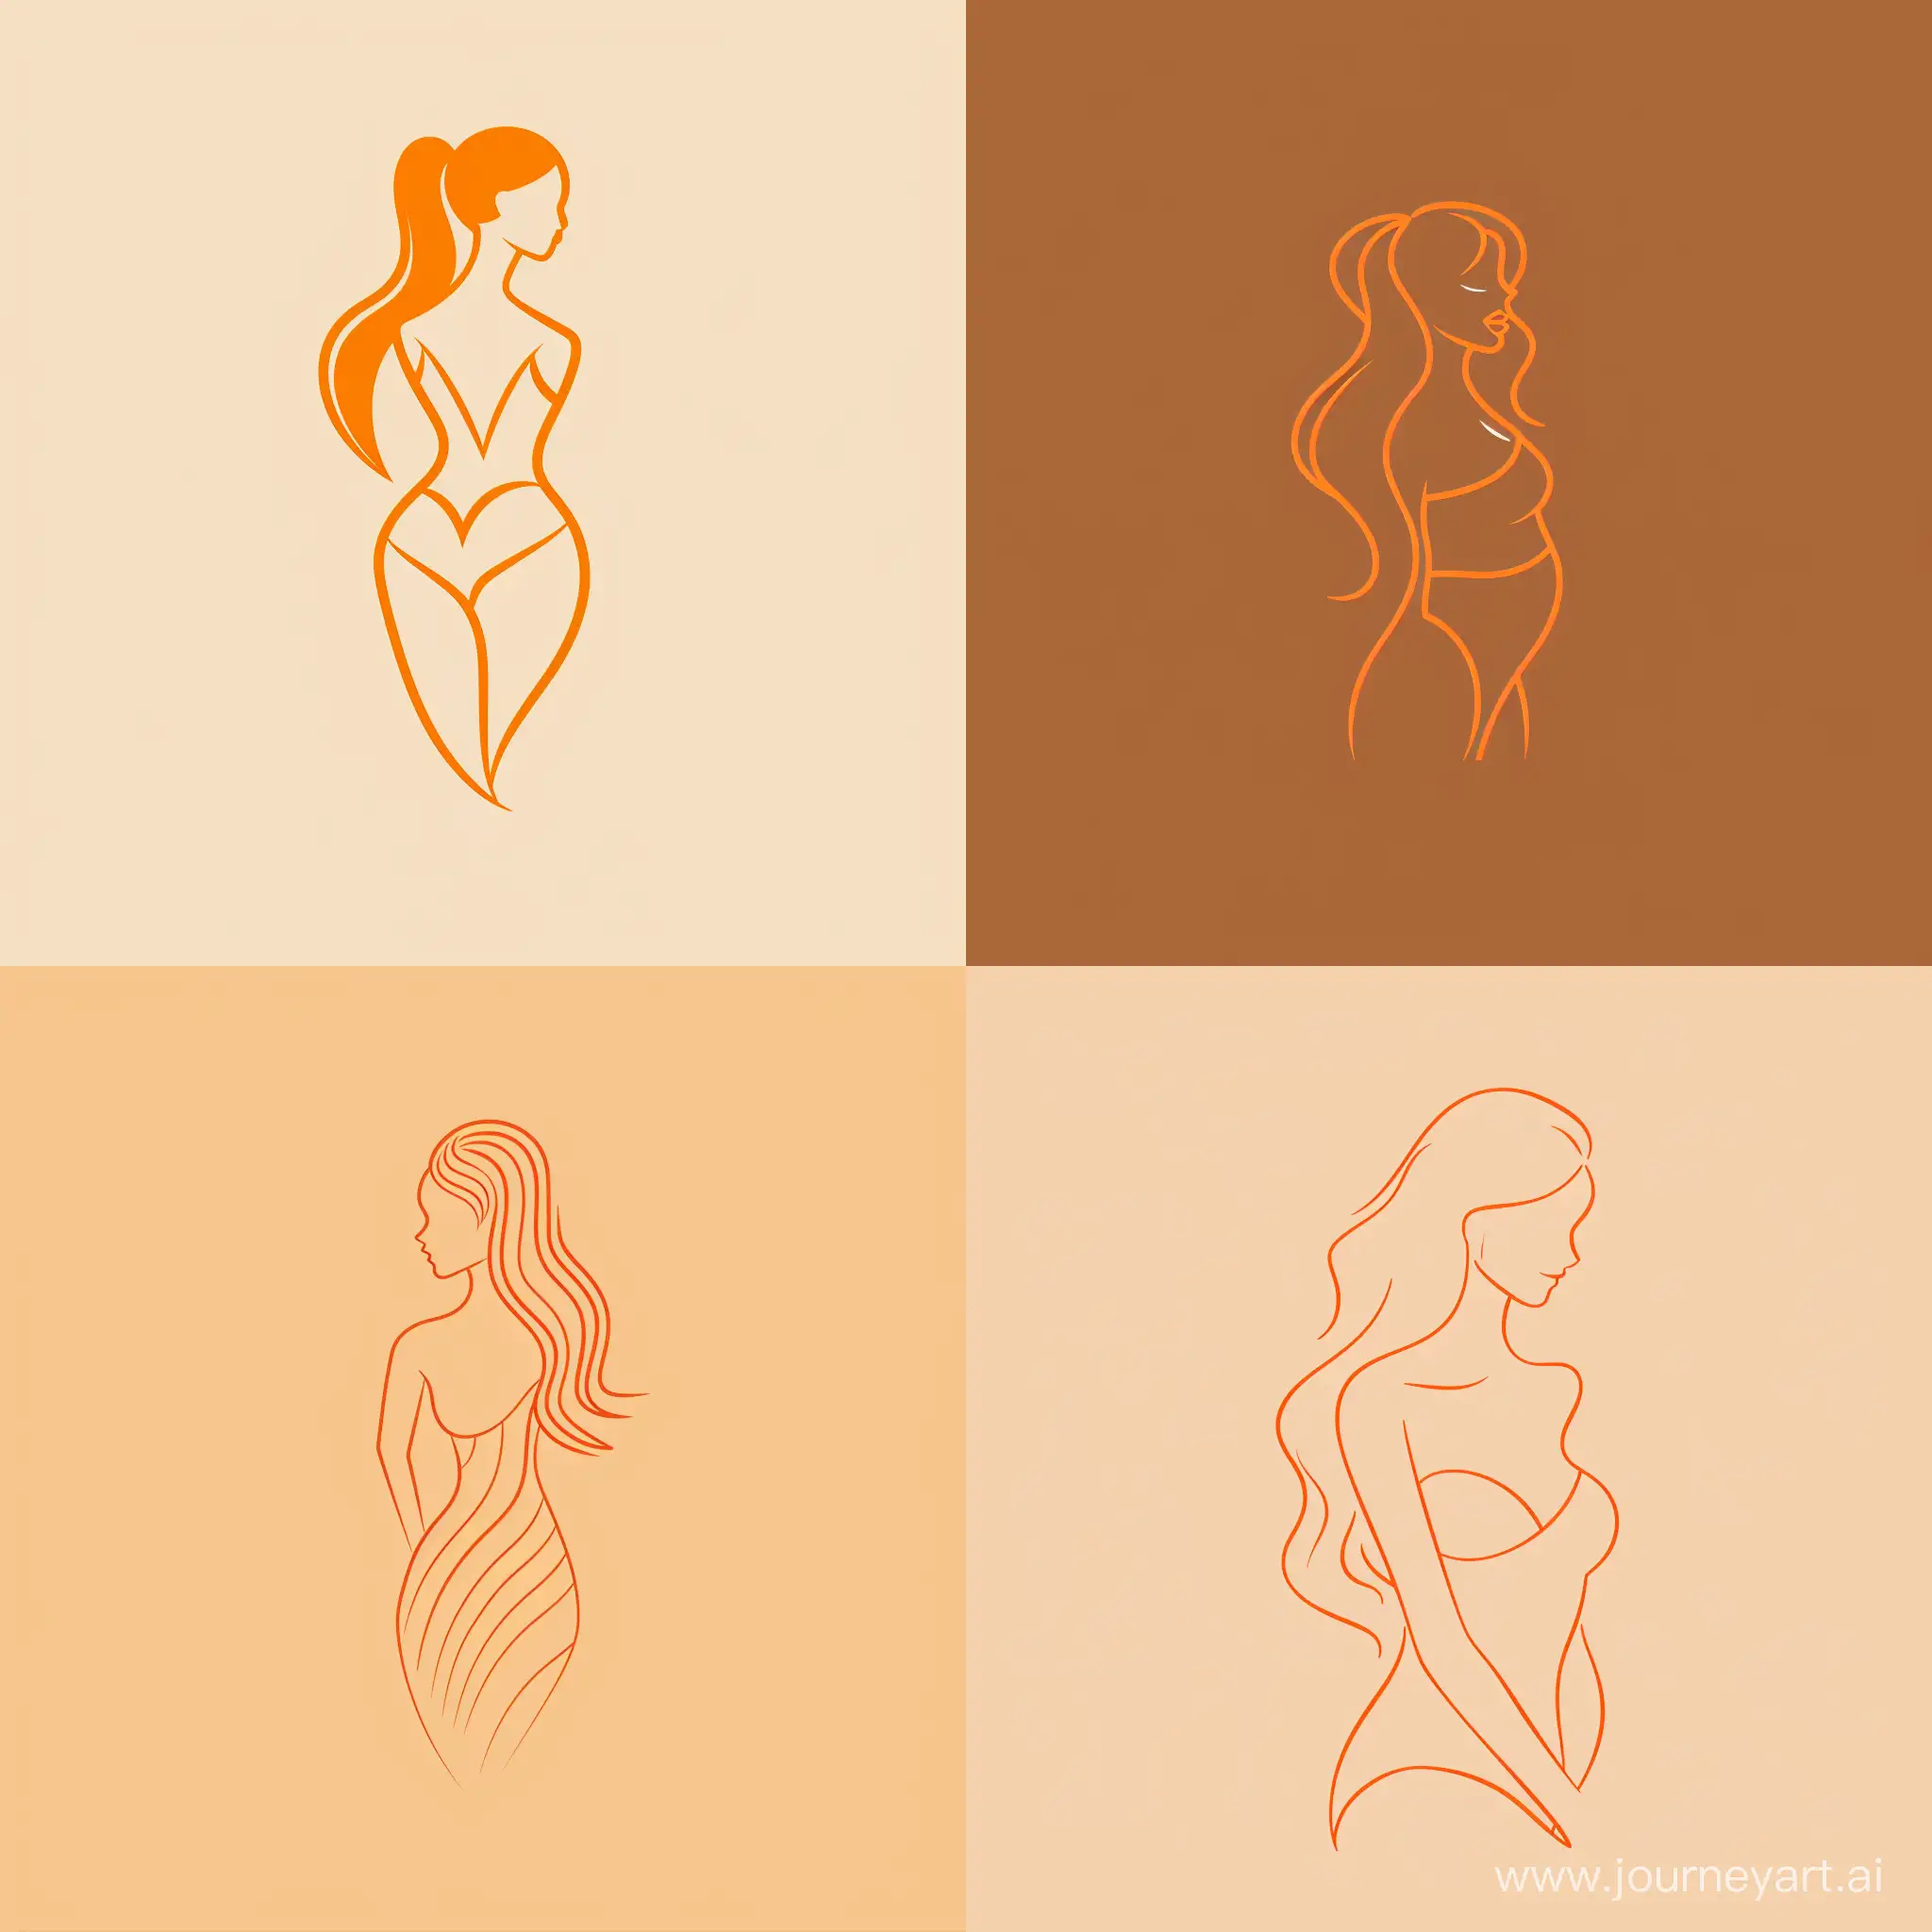 modern, and minimal style logo, 2D line art, and silhouette of a woman’s body, for a women’s beauty and breast bulking center.
in orange and #333333 color
be creative and unique.